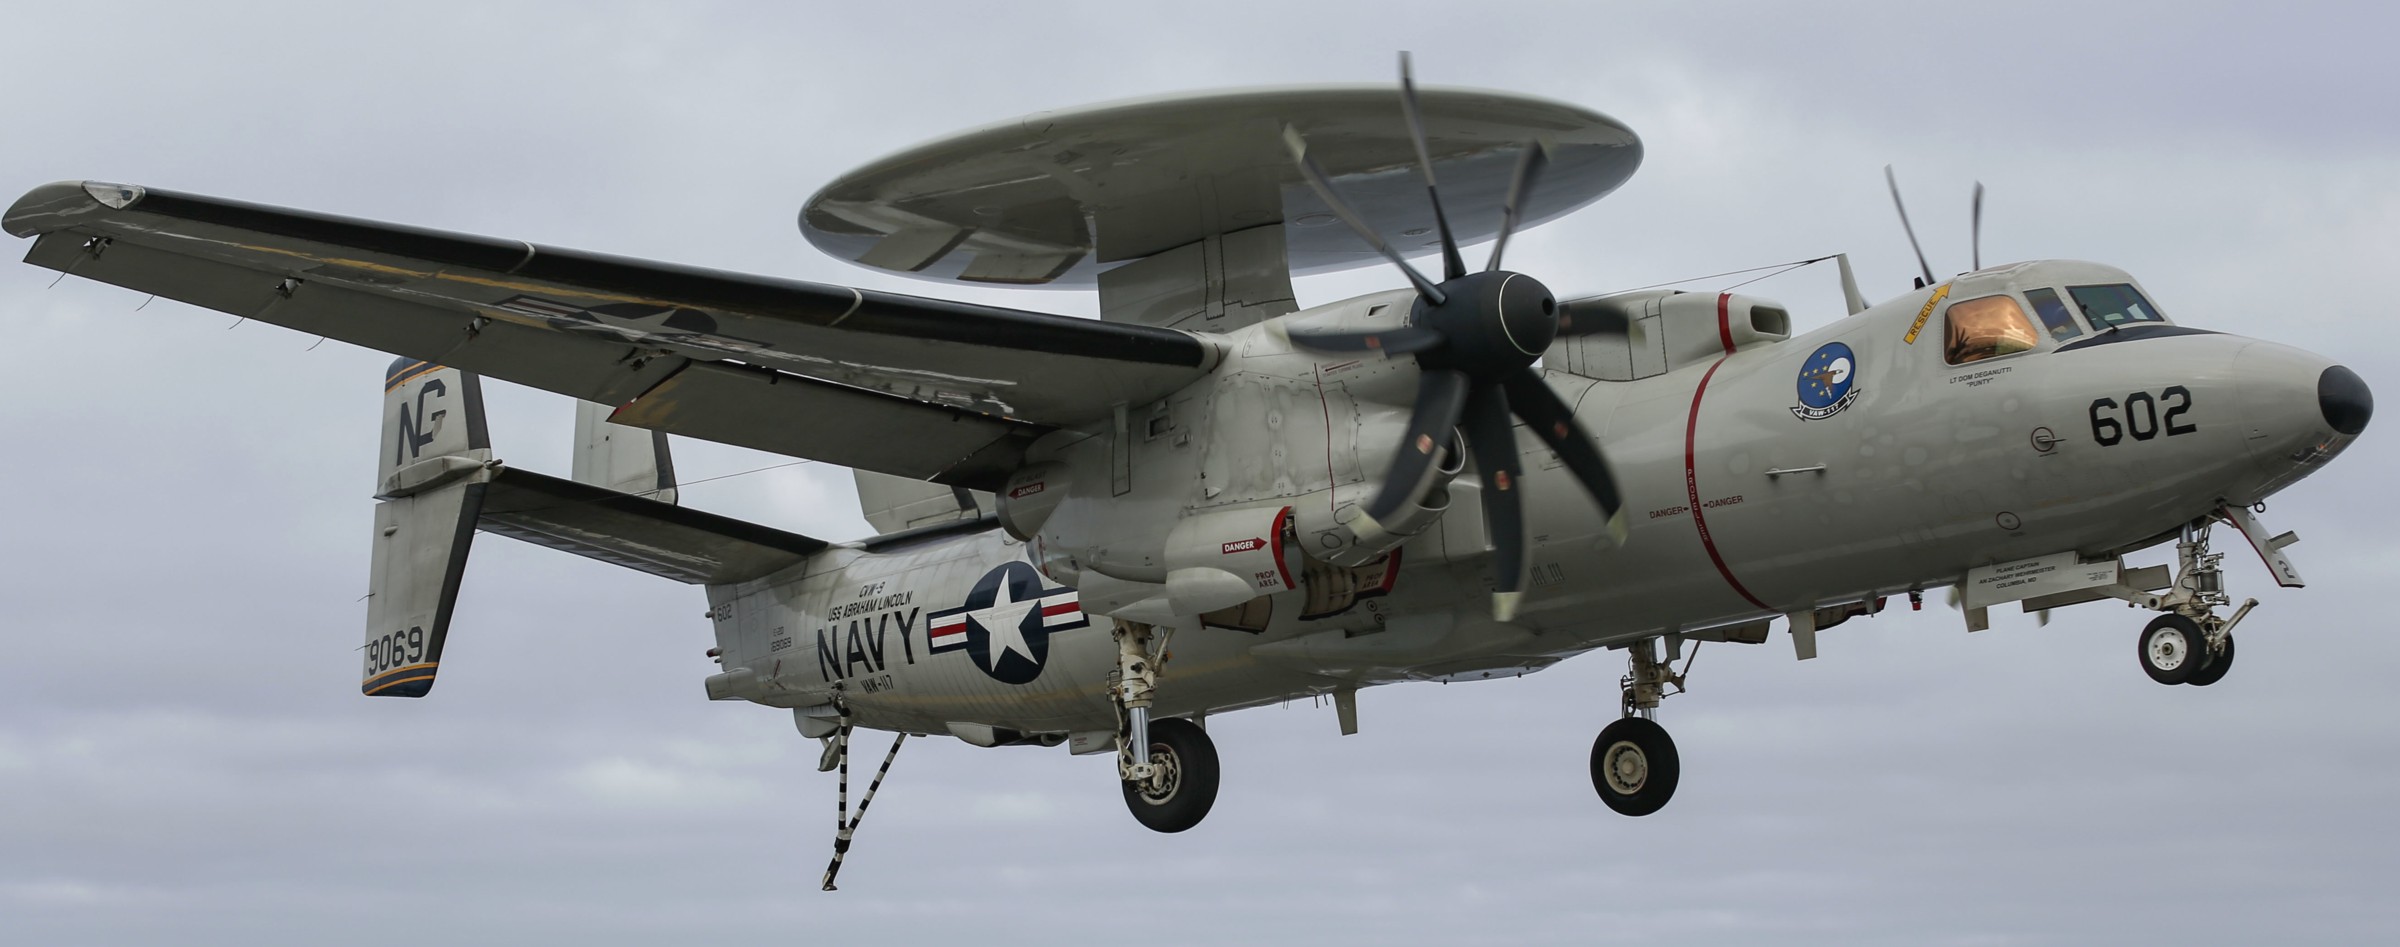 vaw-117 wallbangers airborne command and control squadron navy e-2d hawkeye cvw-9 uss abraham lincoln cvn-72 34